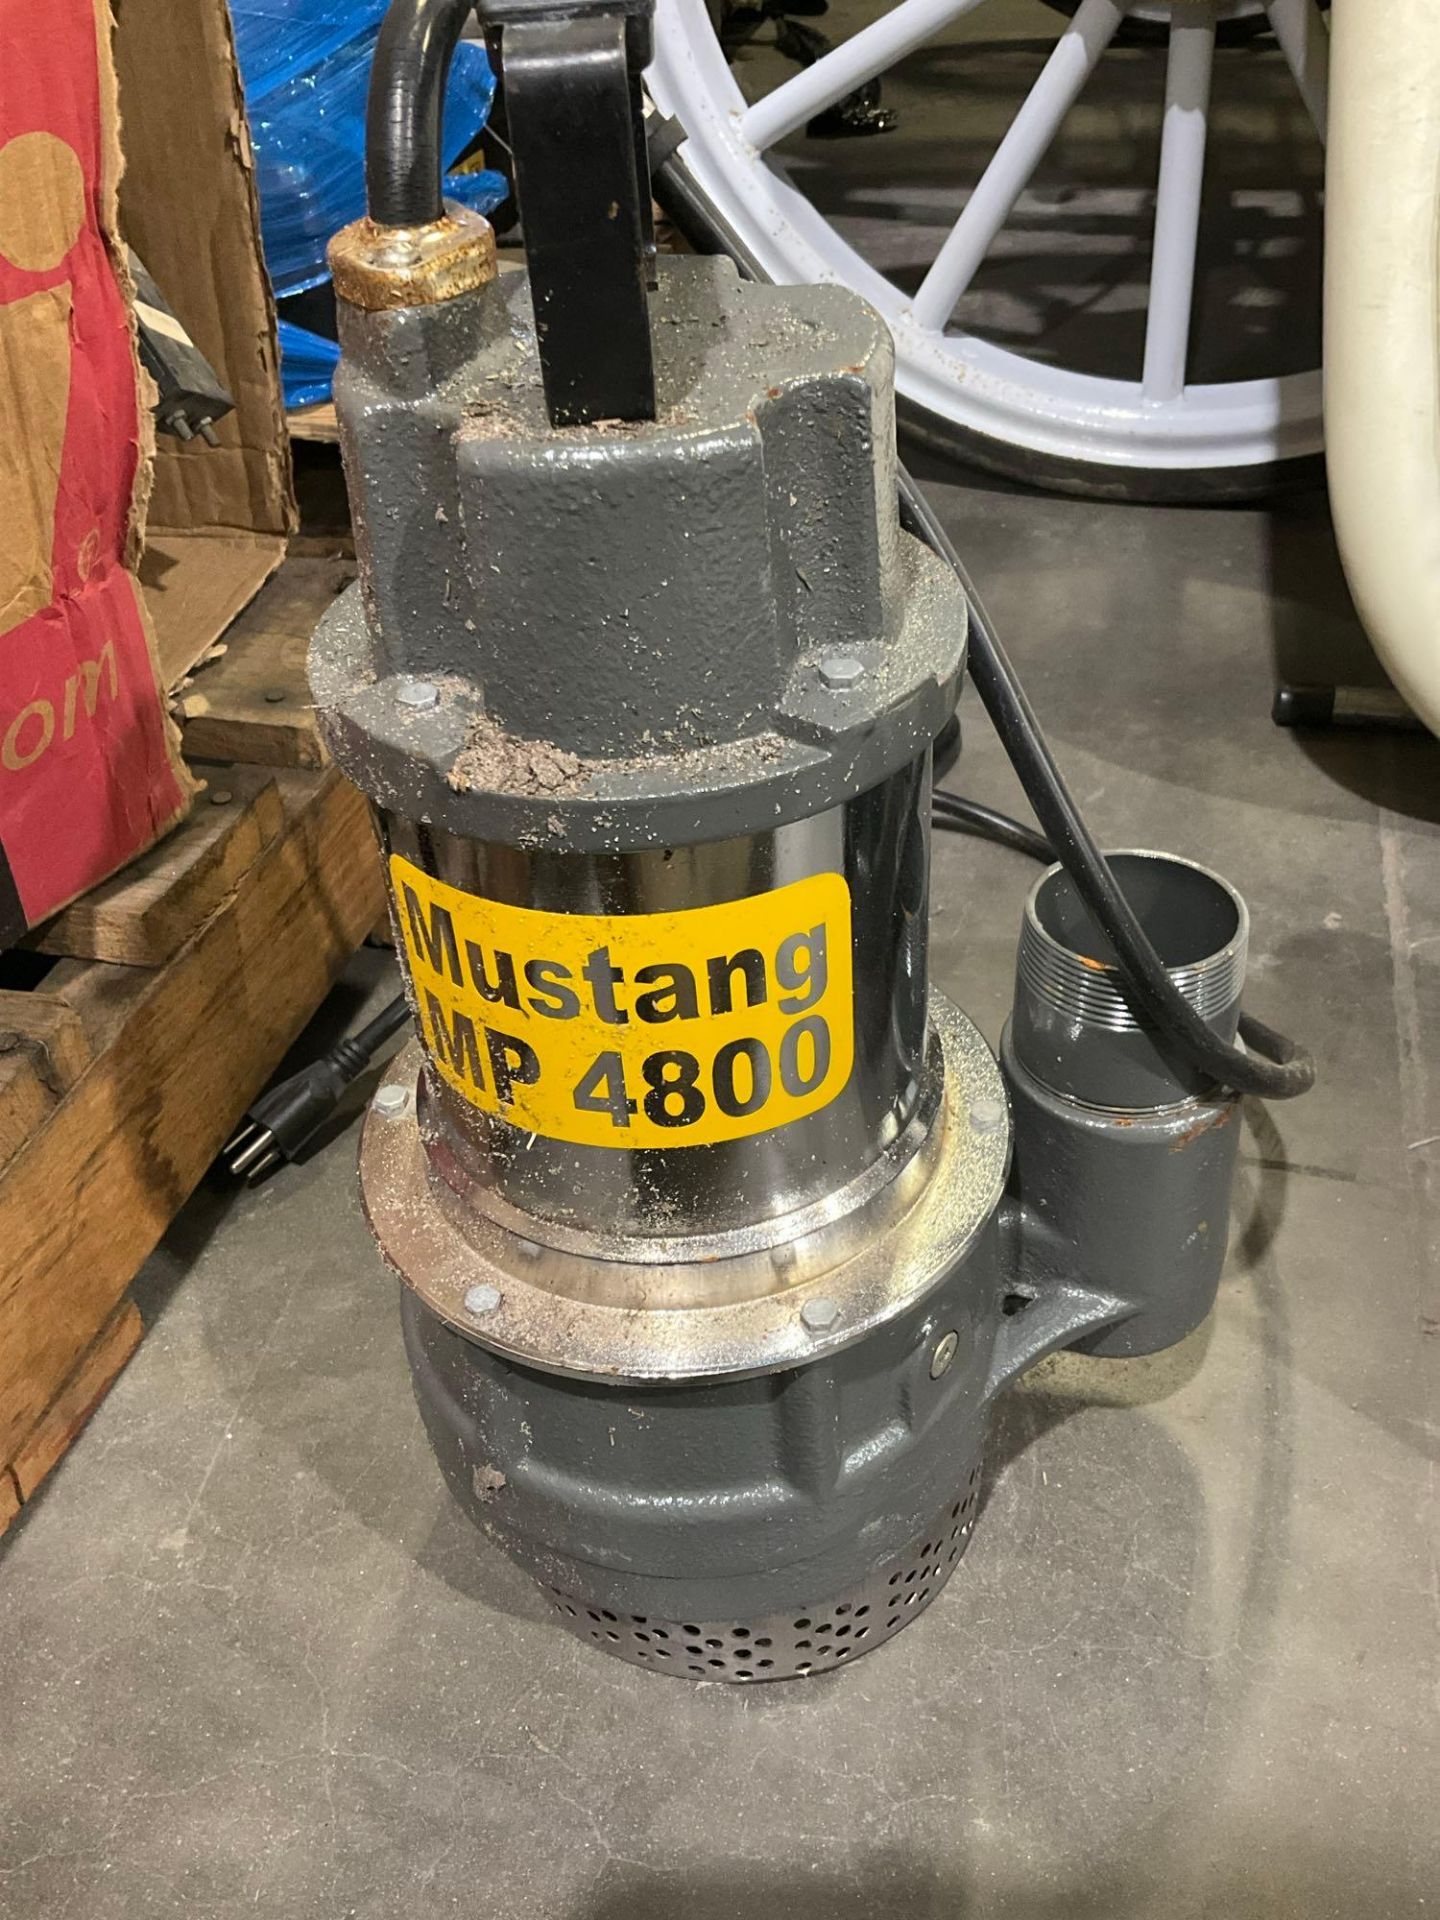 UNUSED 2" SUBMERSIBLE MUSTANG PUMP MP4800 - Image 2 of 4